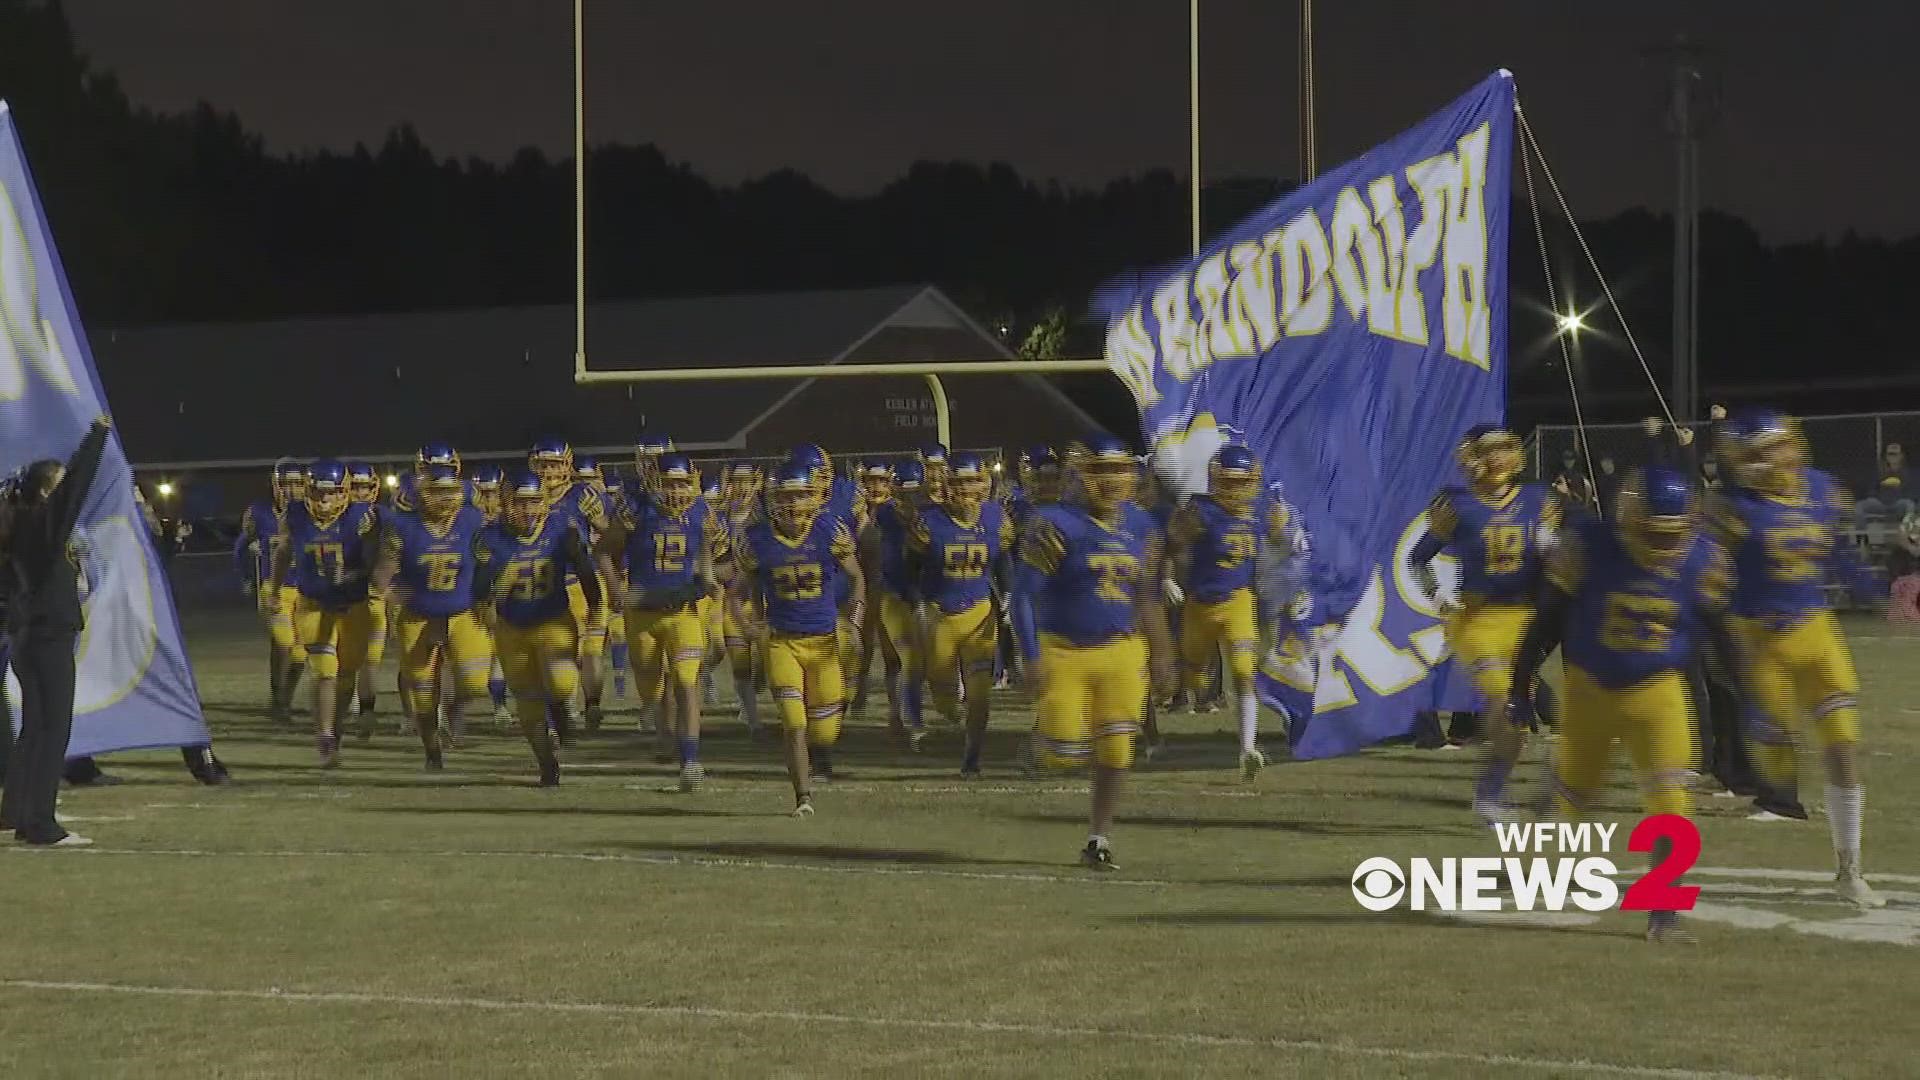 Eastern Randolph gets the 20-12 win and is now 5-1 on the season.